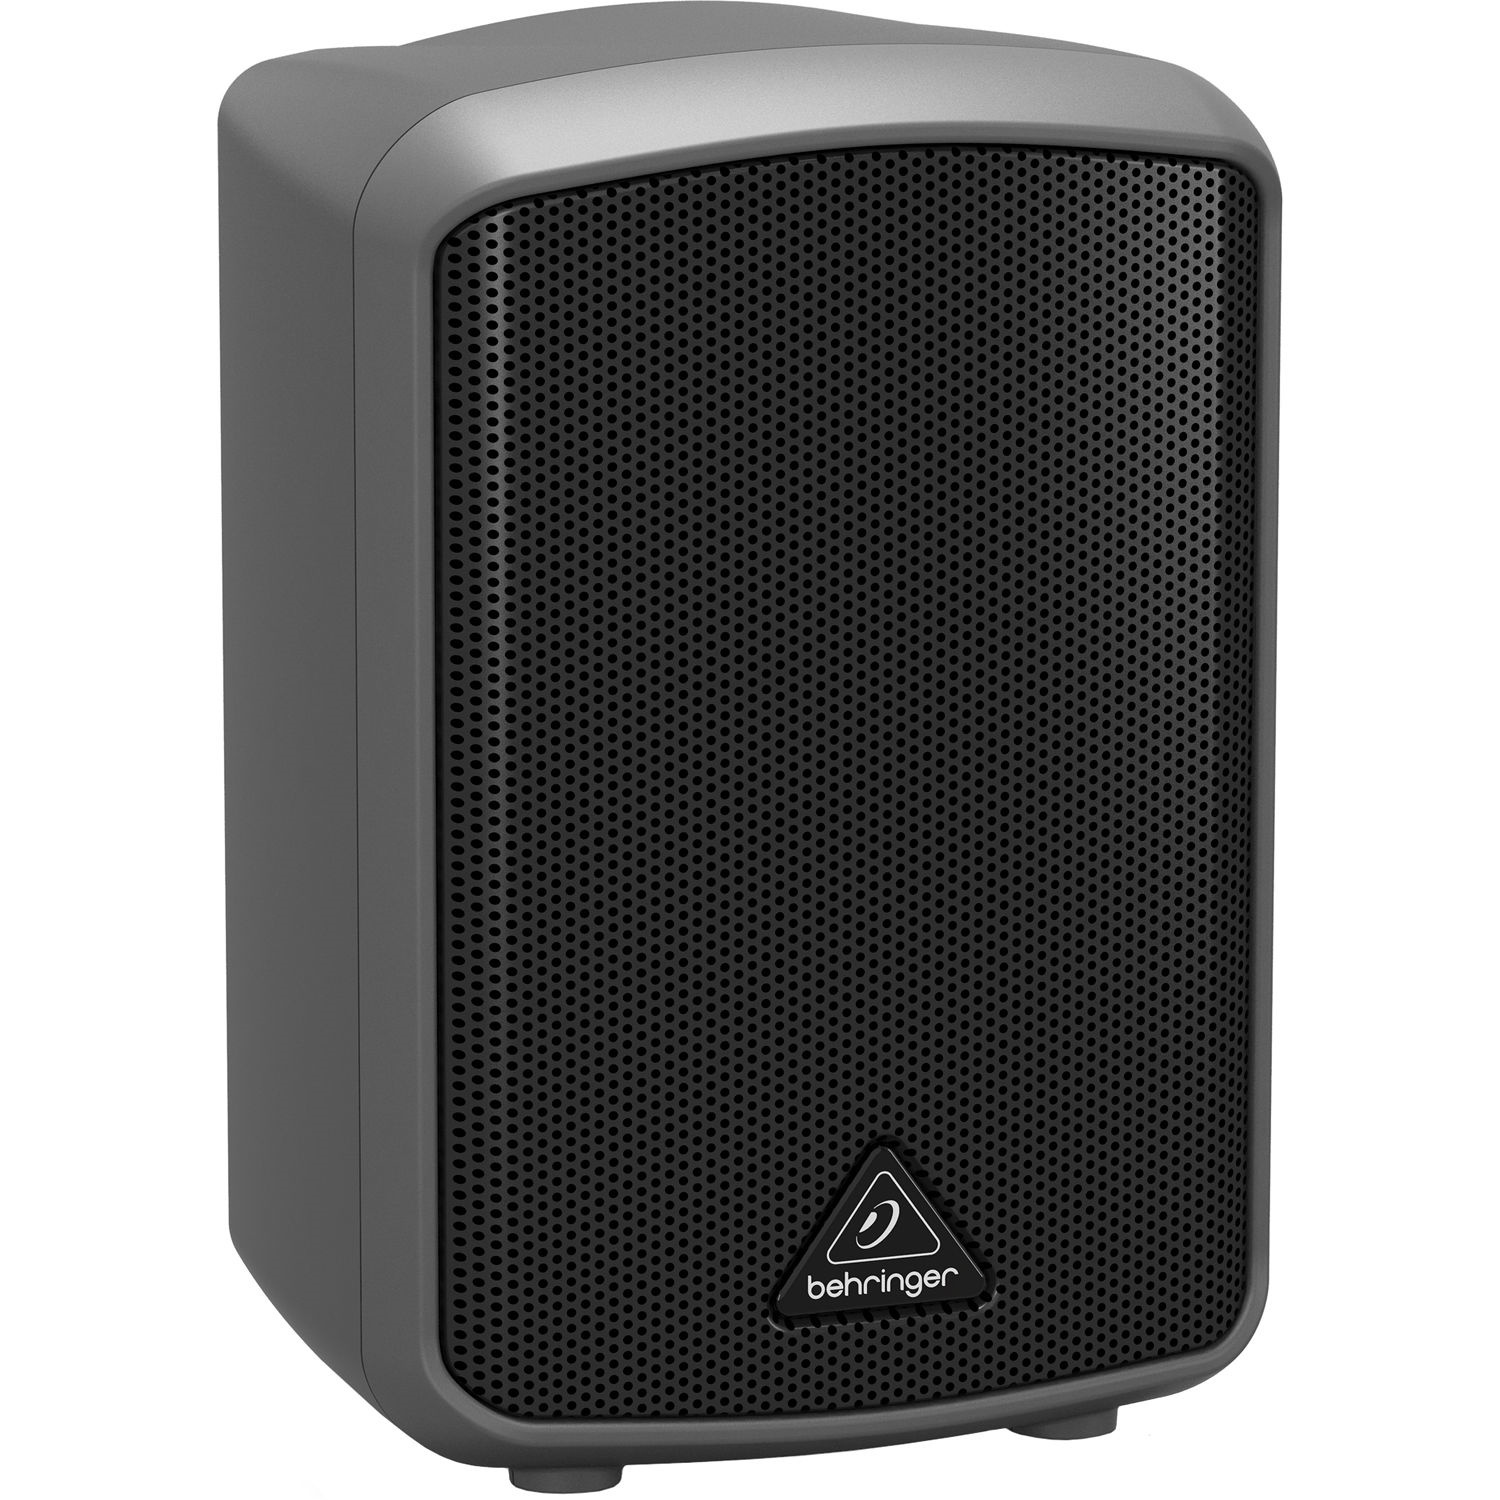 Behringer Europort MPA30BT Portable All-In-One Bluetooth Ready PA System